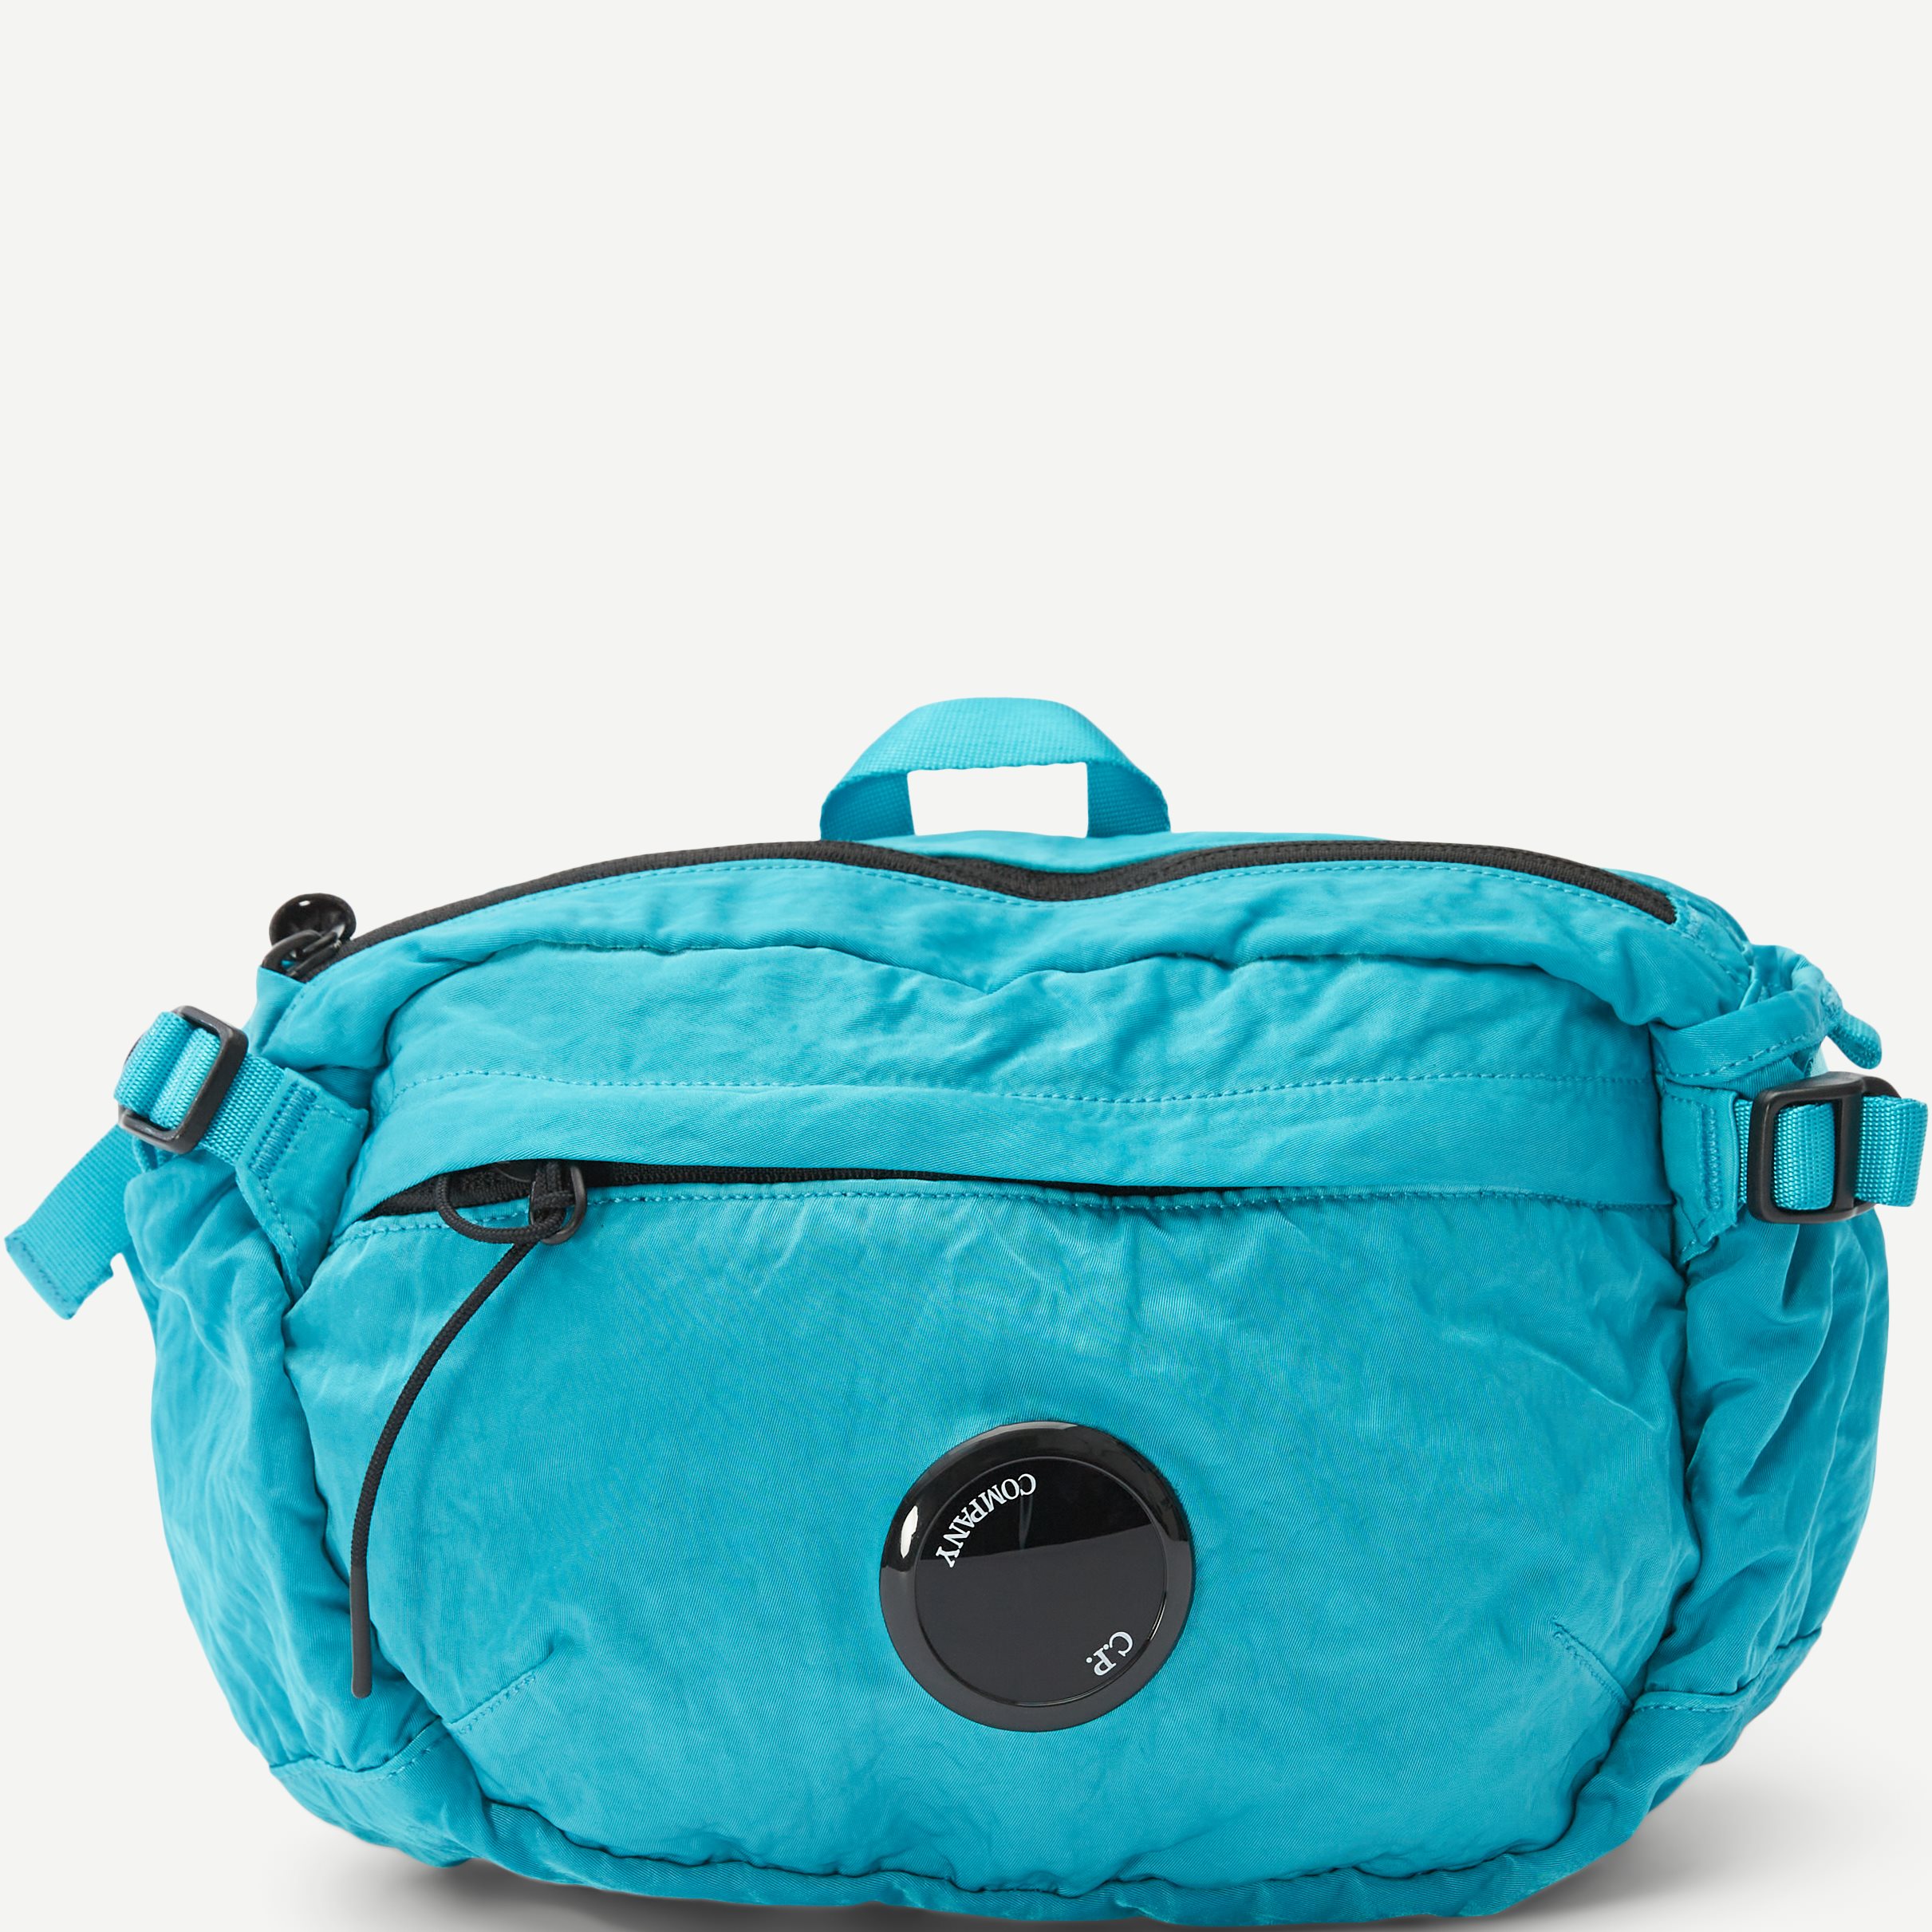 C.P. Company Bags AC112A 5269G SS23 Turquoise